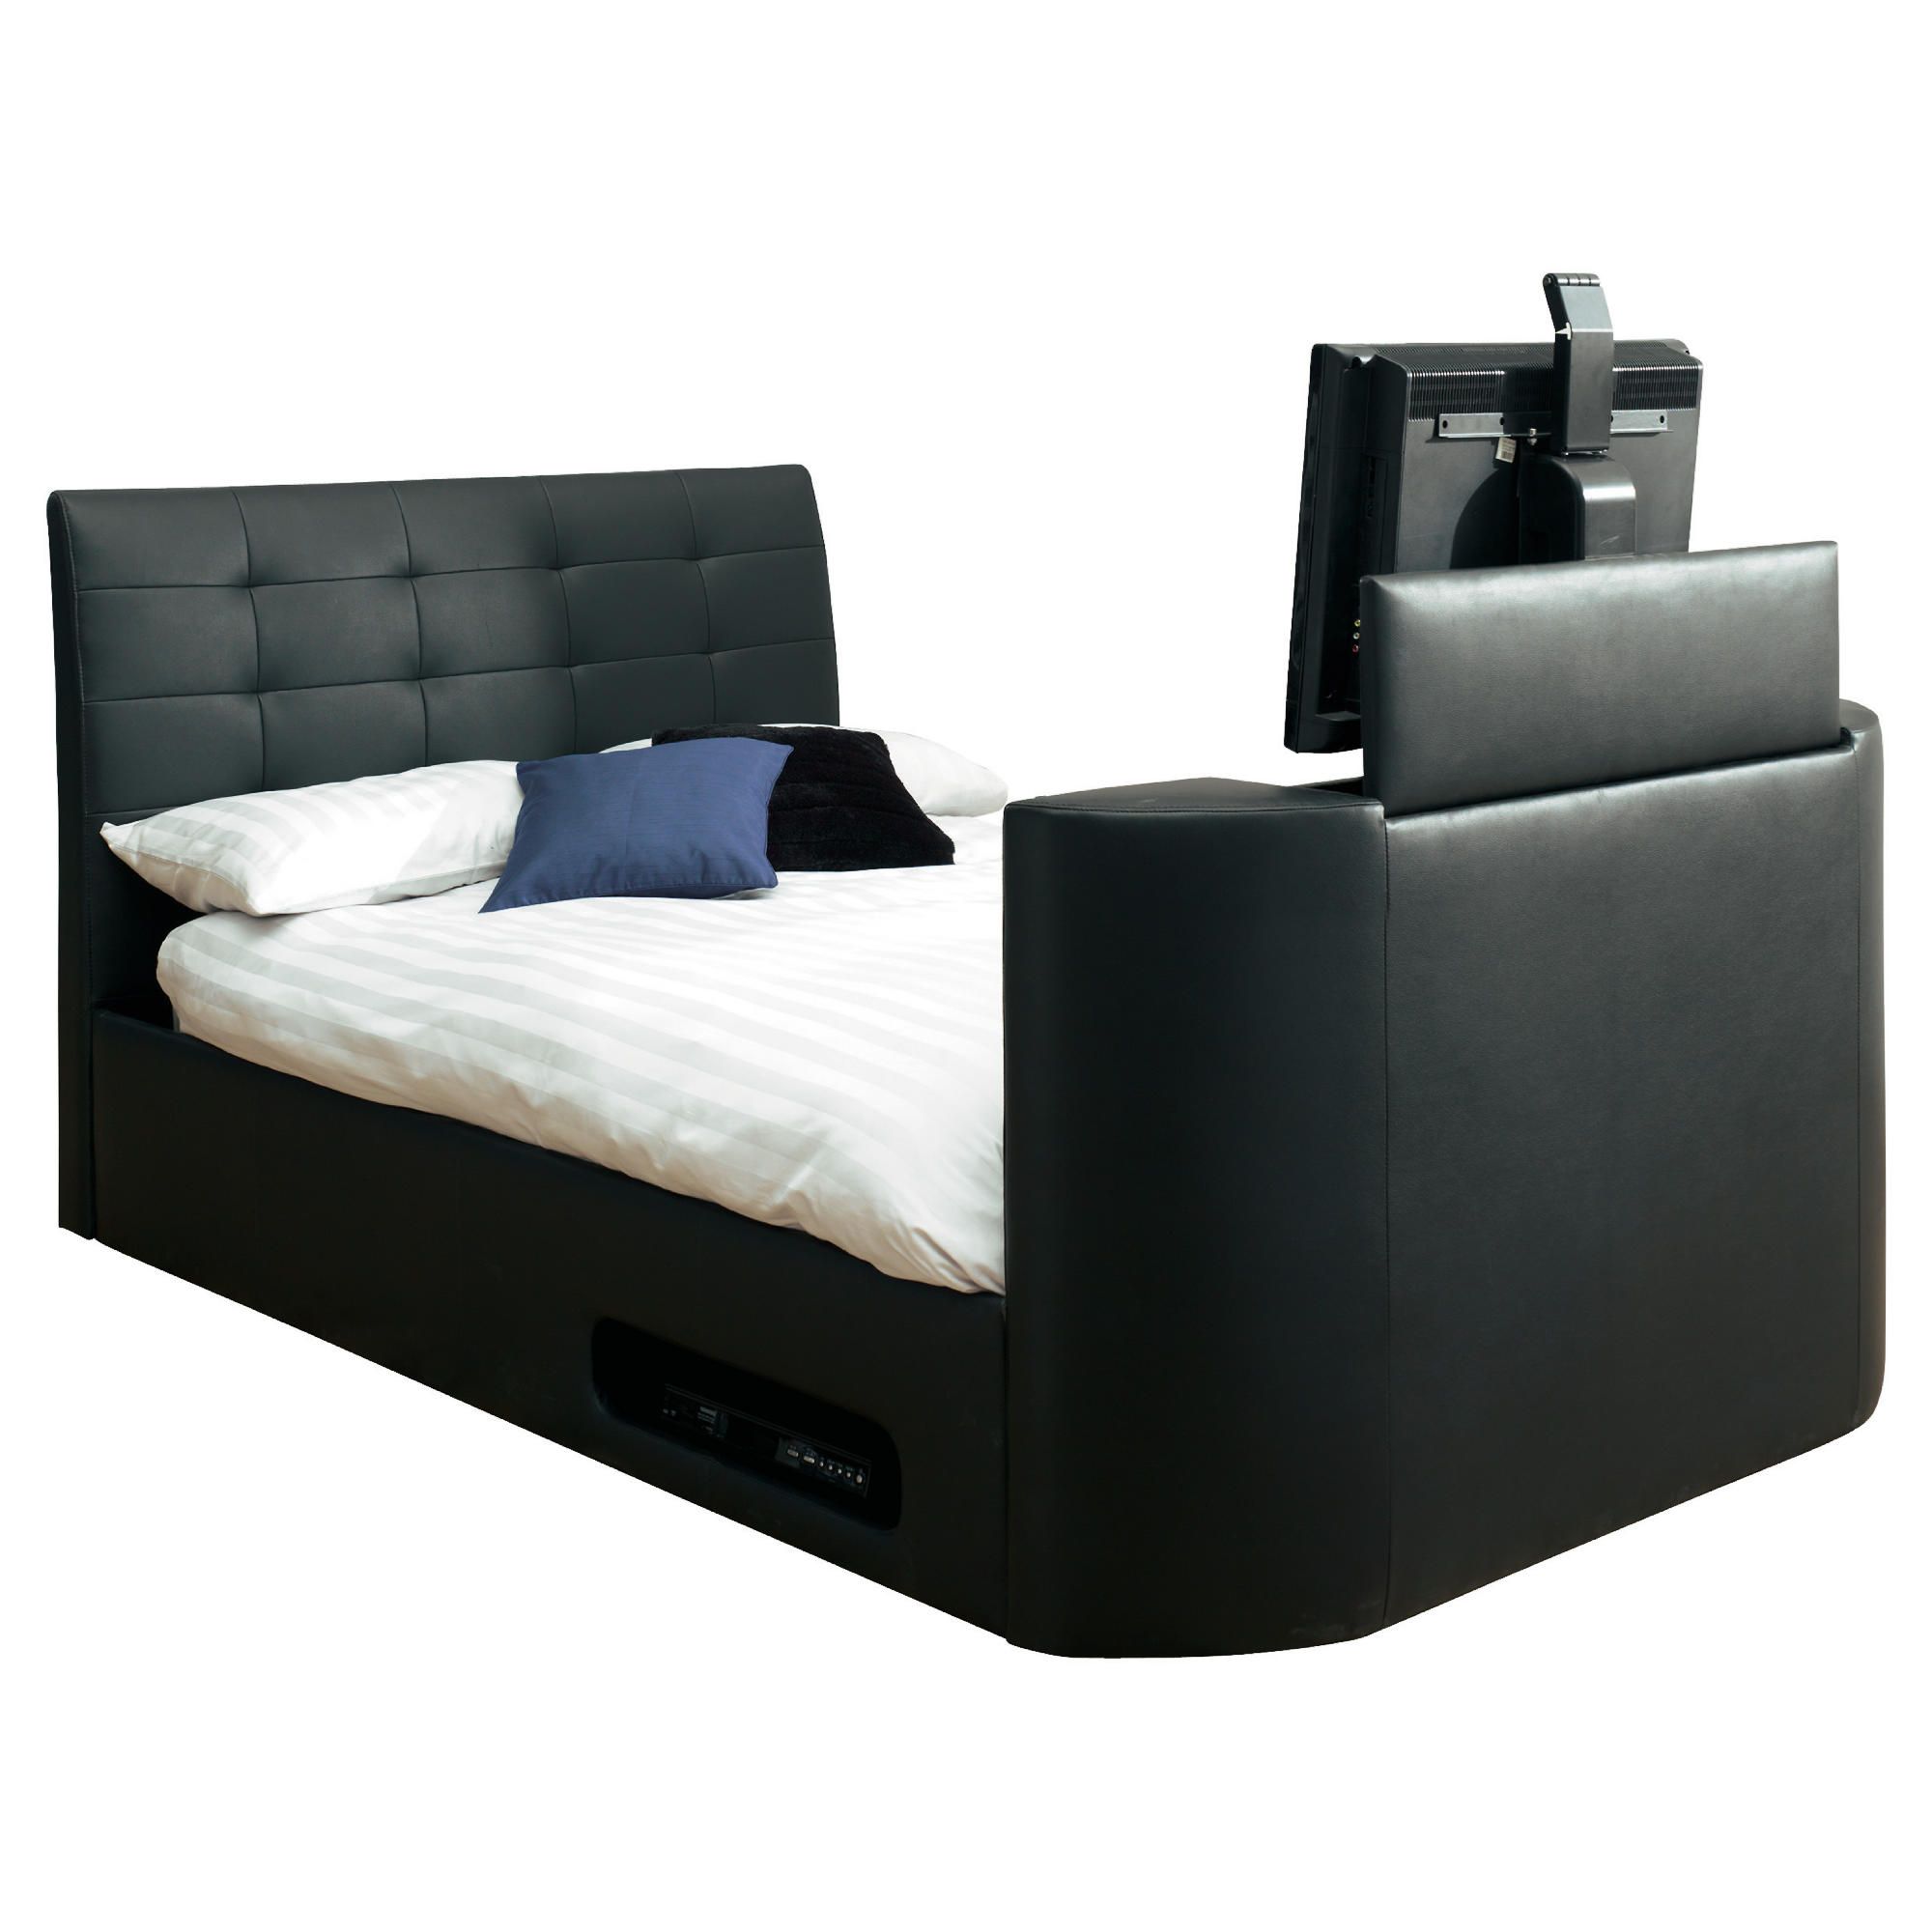 Hampton Double Wireless Tv Bed Frame, Black at Tesco Direct